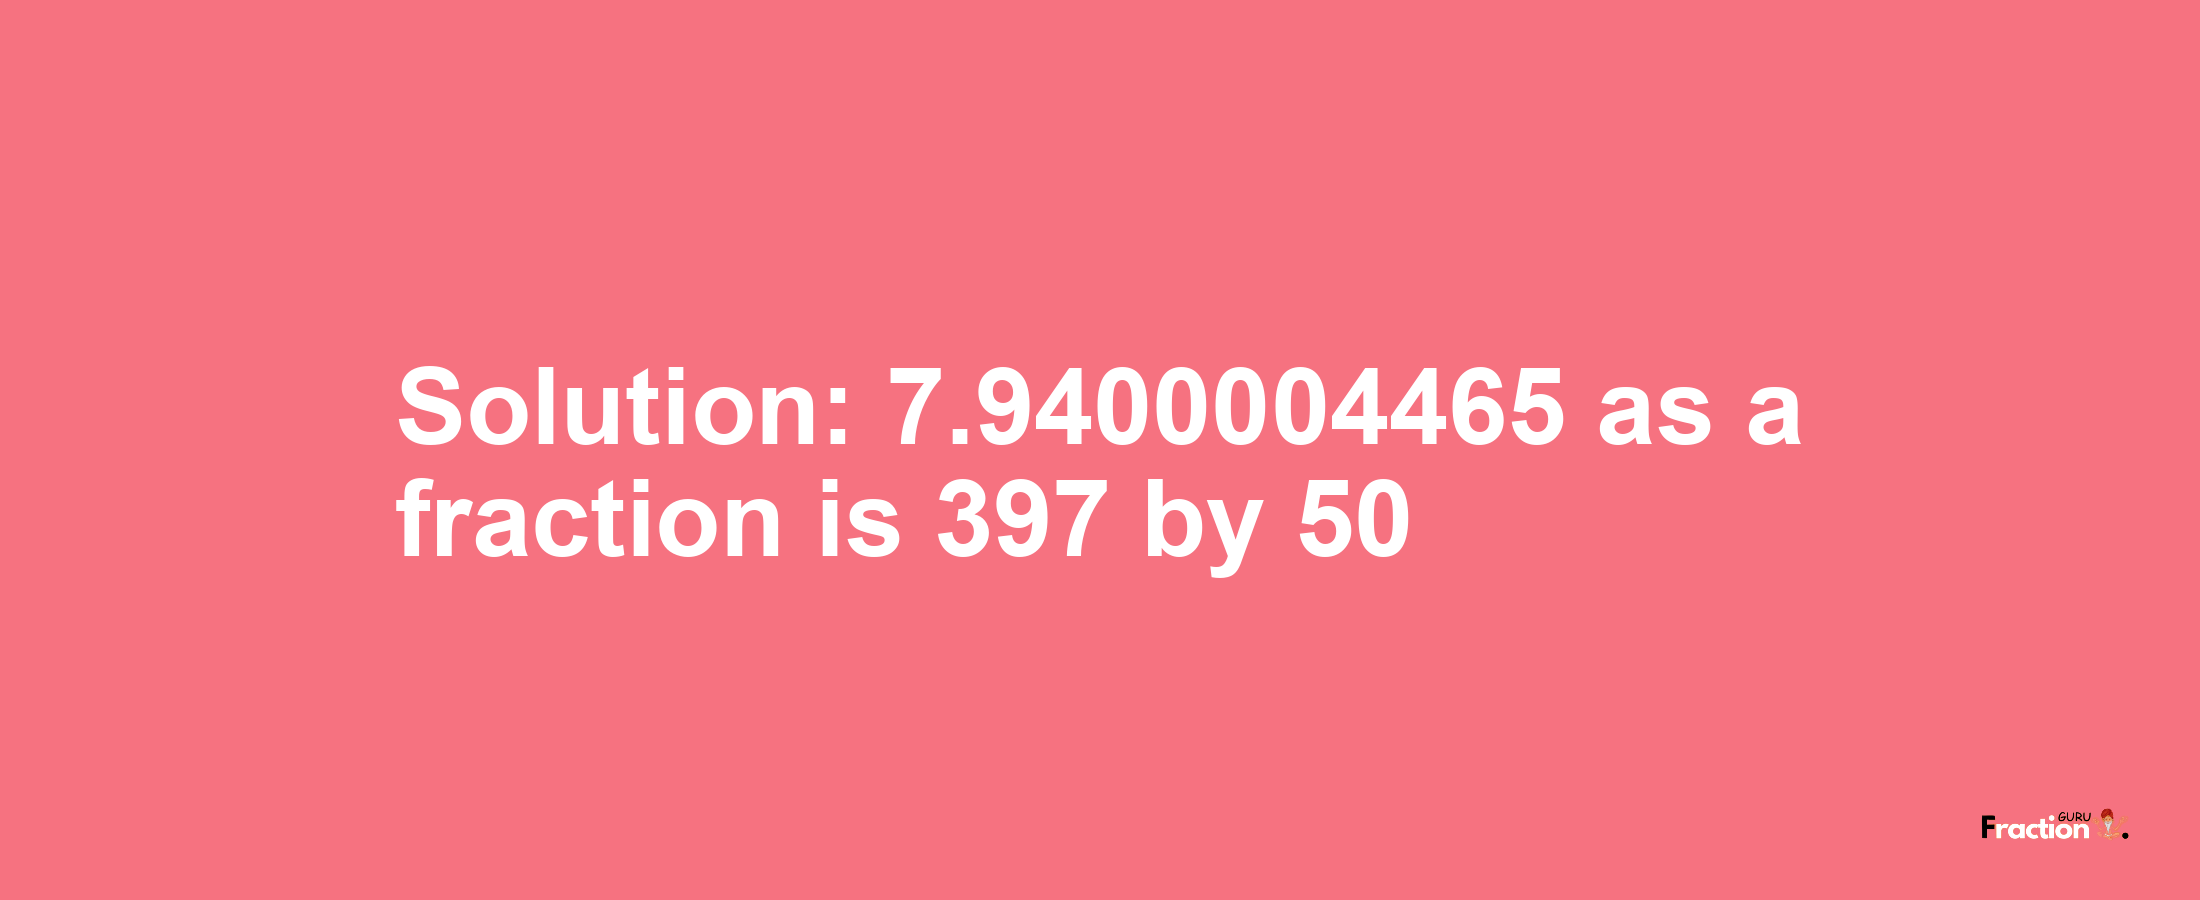 Solution:7.9400004465 as a fraction is 397/50